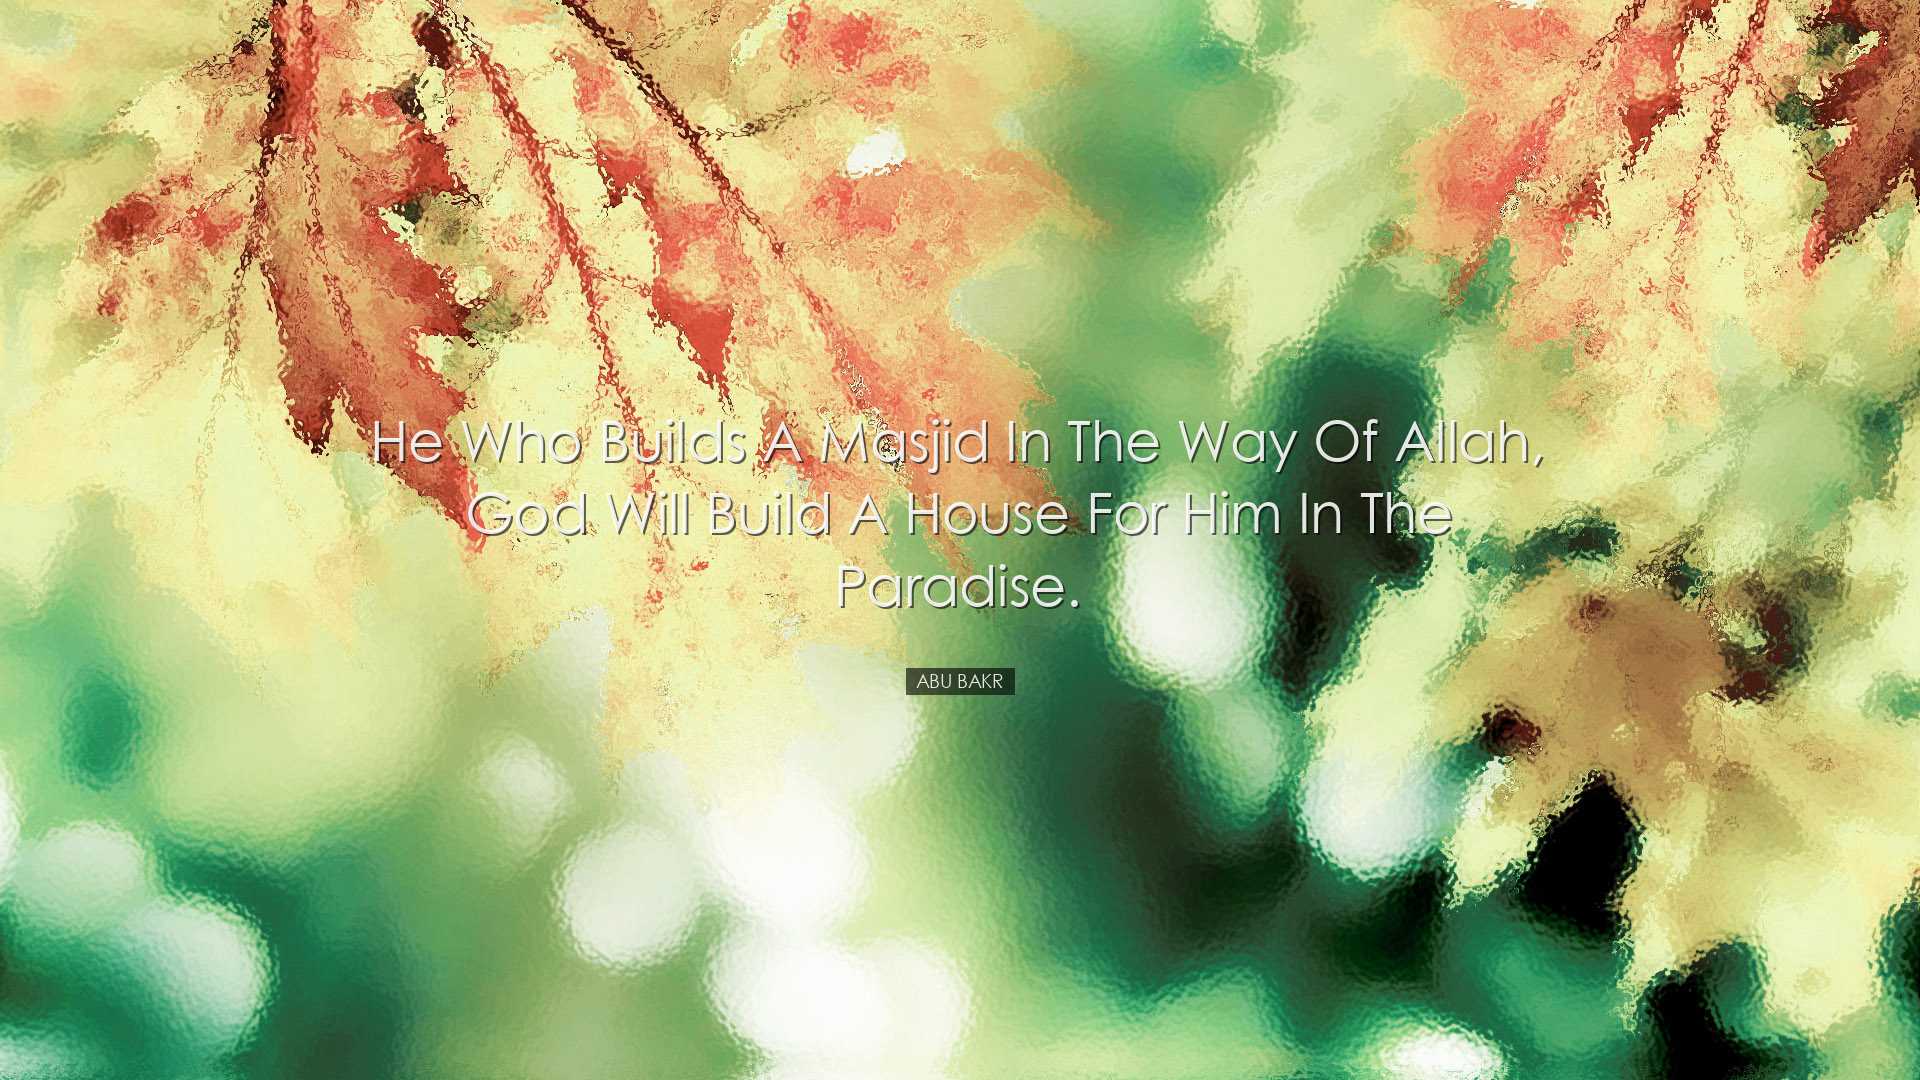 He who builds a masjid in the way of Allah, God will build a house